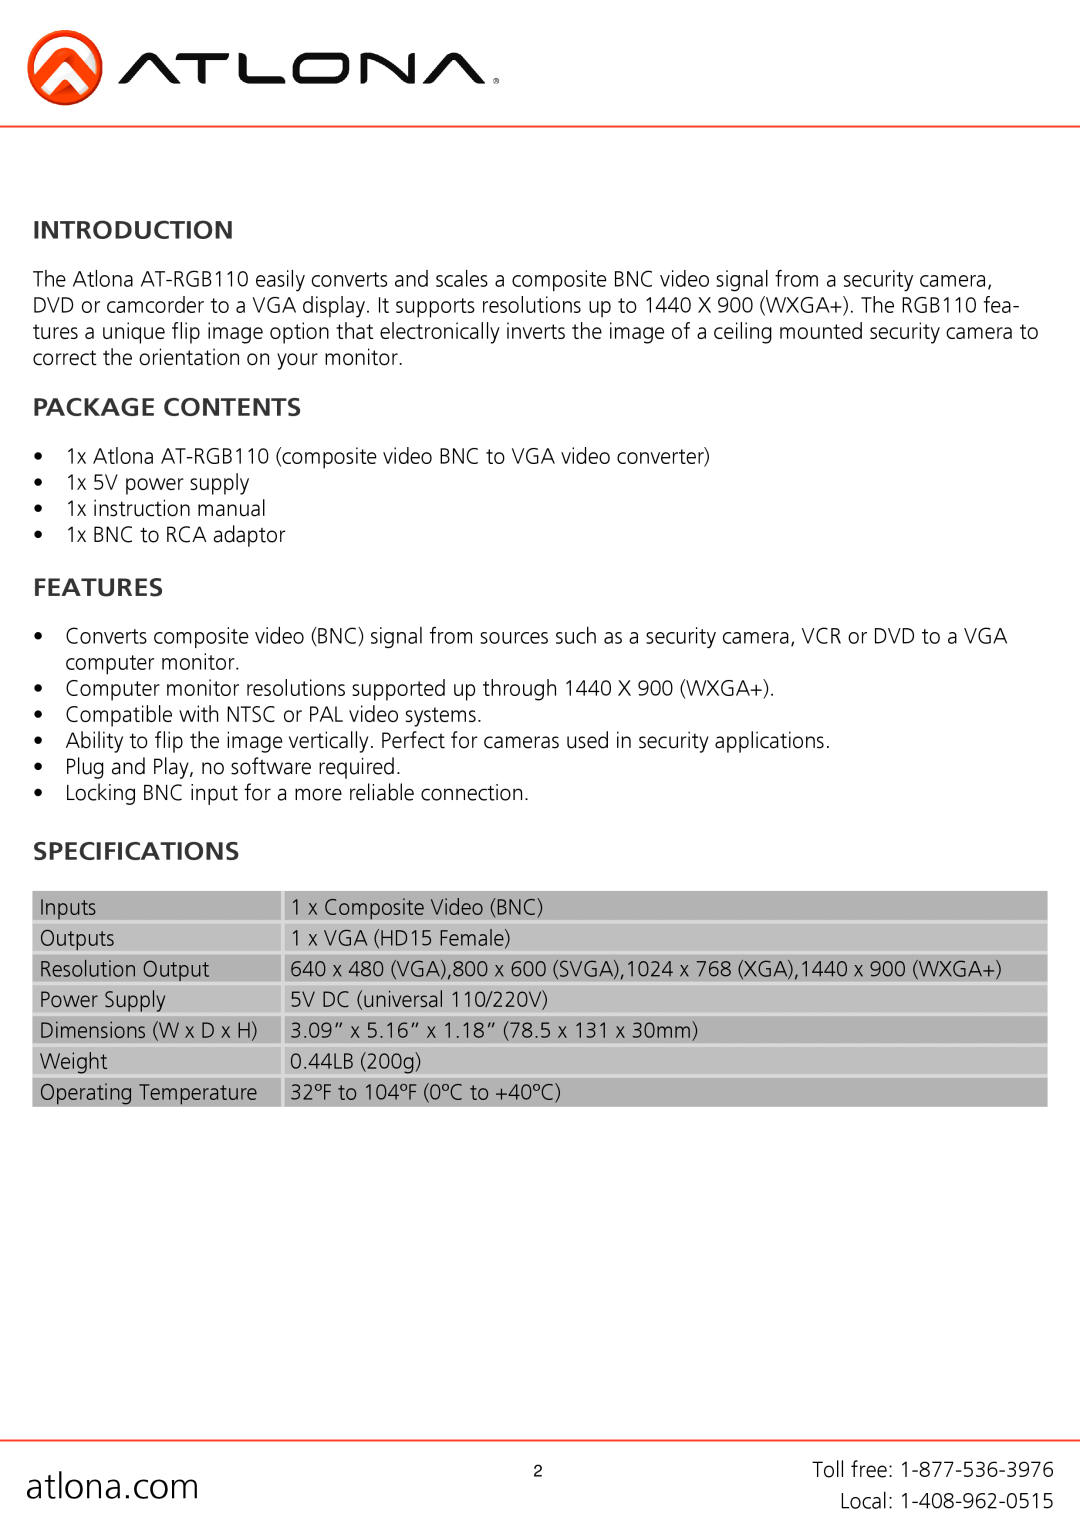 Atlona AT-RGB110 user manual Introduction, Package Contents, Features, Specifications, atlona.com 